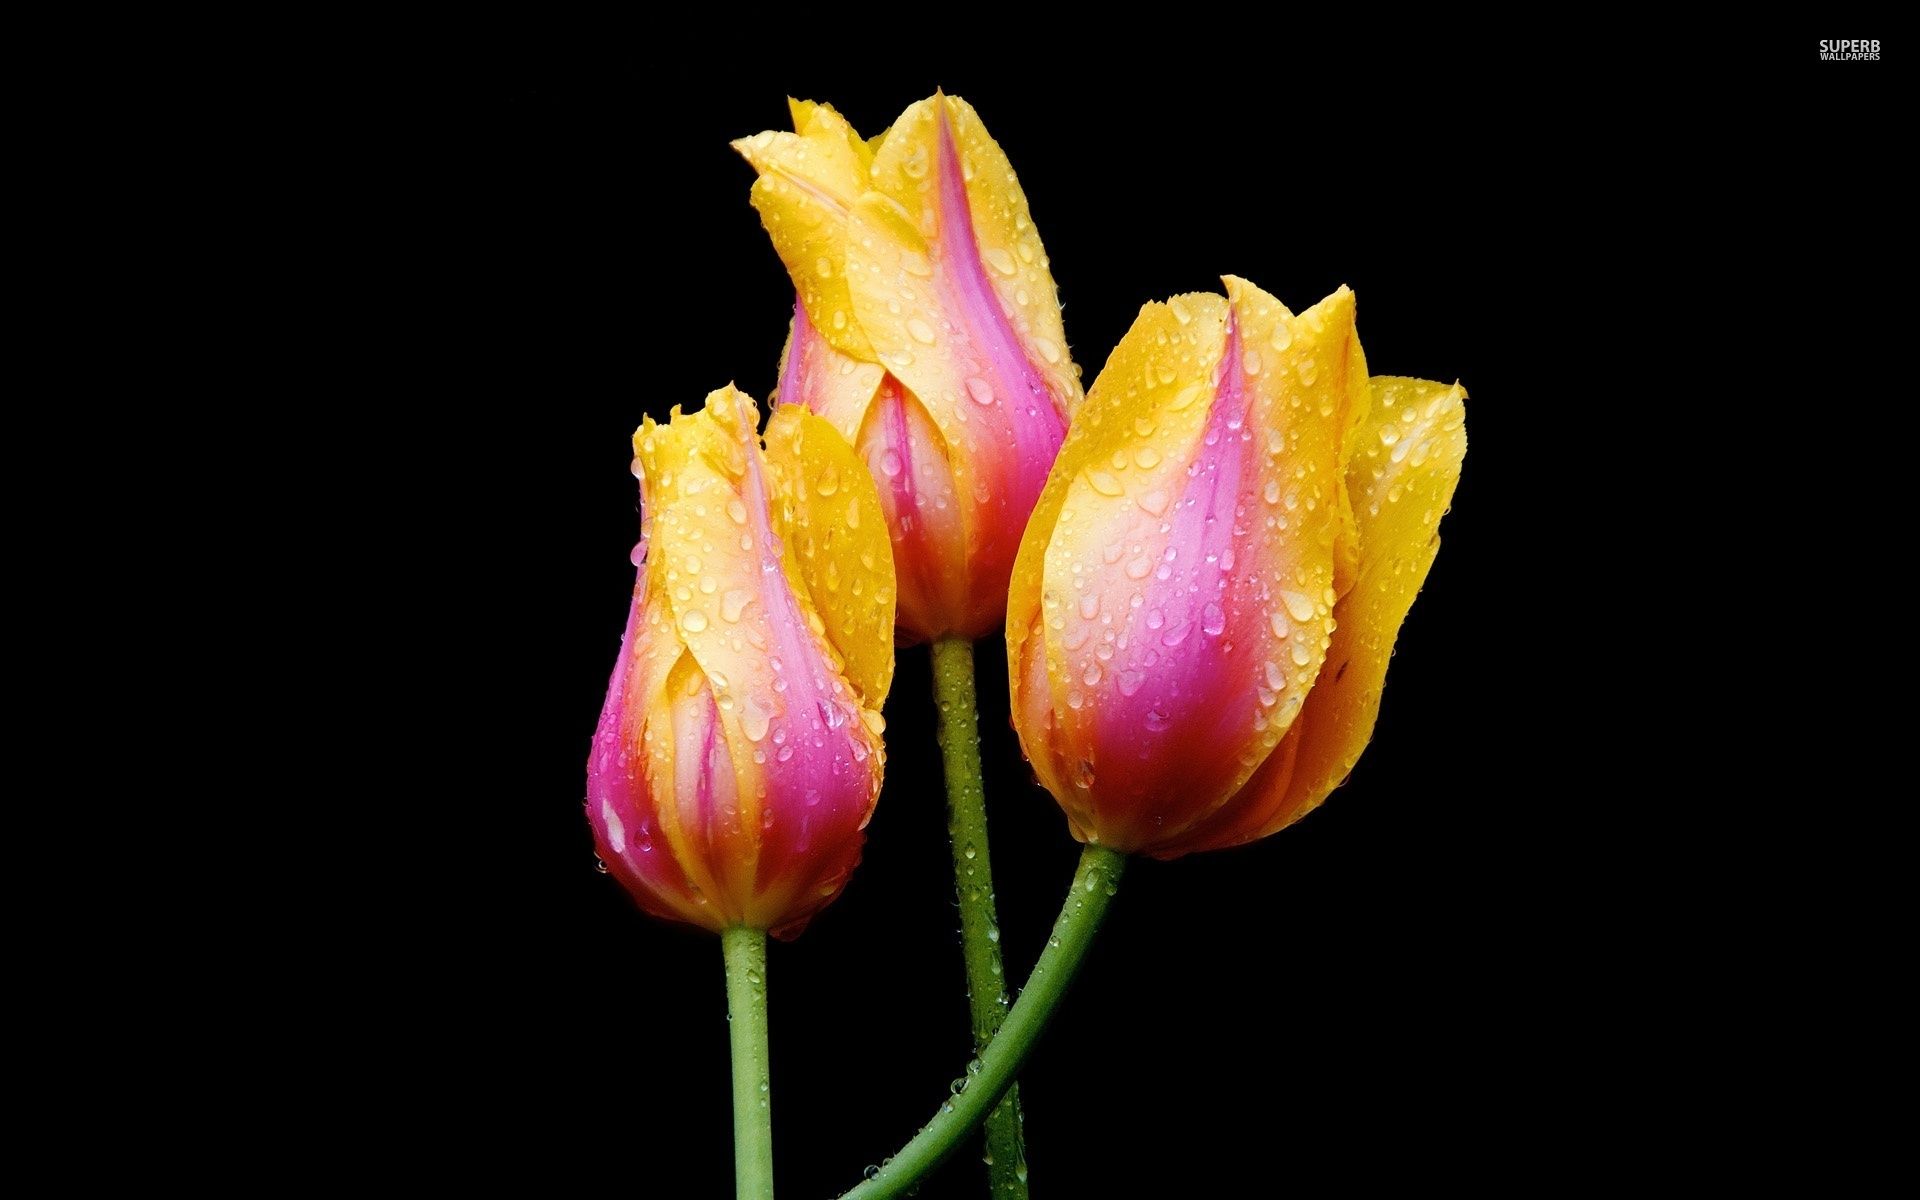 pink-and-golden-tulips-with-water-drops-50621-1920x1200.jpg